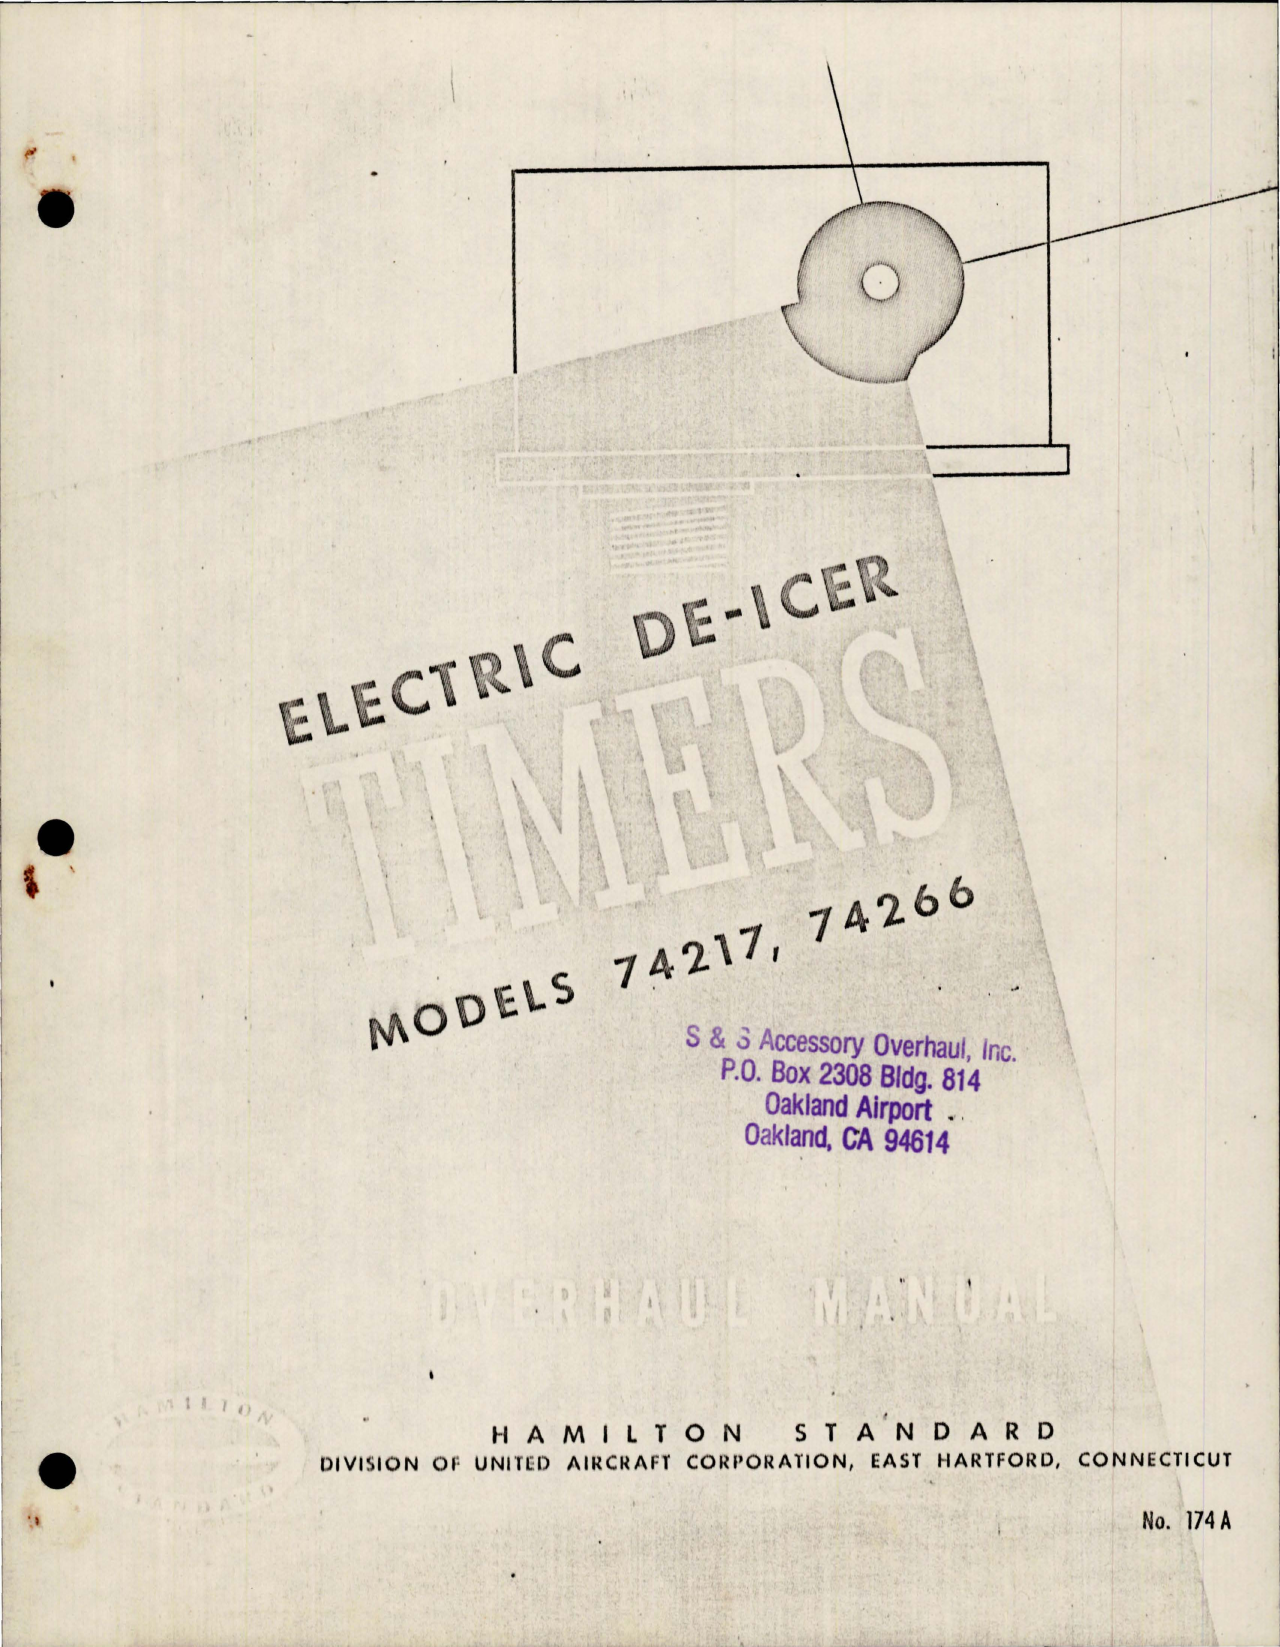 Sample page 1 from AirCorps Library document: Overhaul Manual w Parts for Electric De-Icer Timers - Models 74217 and 74266 